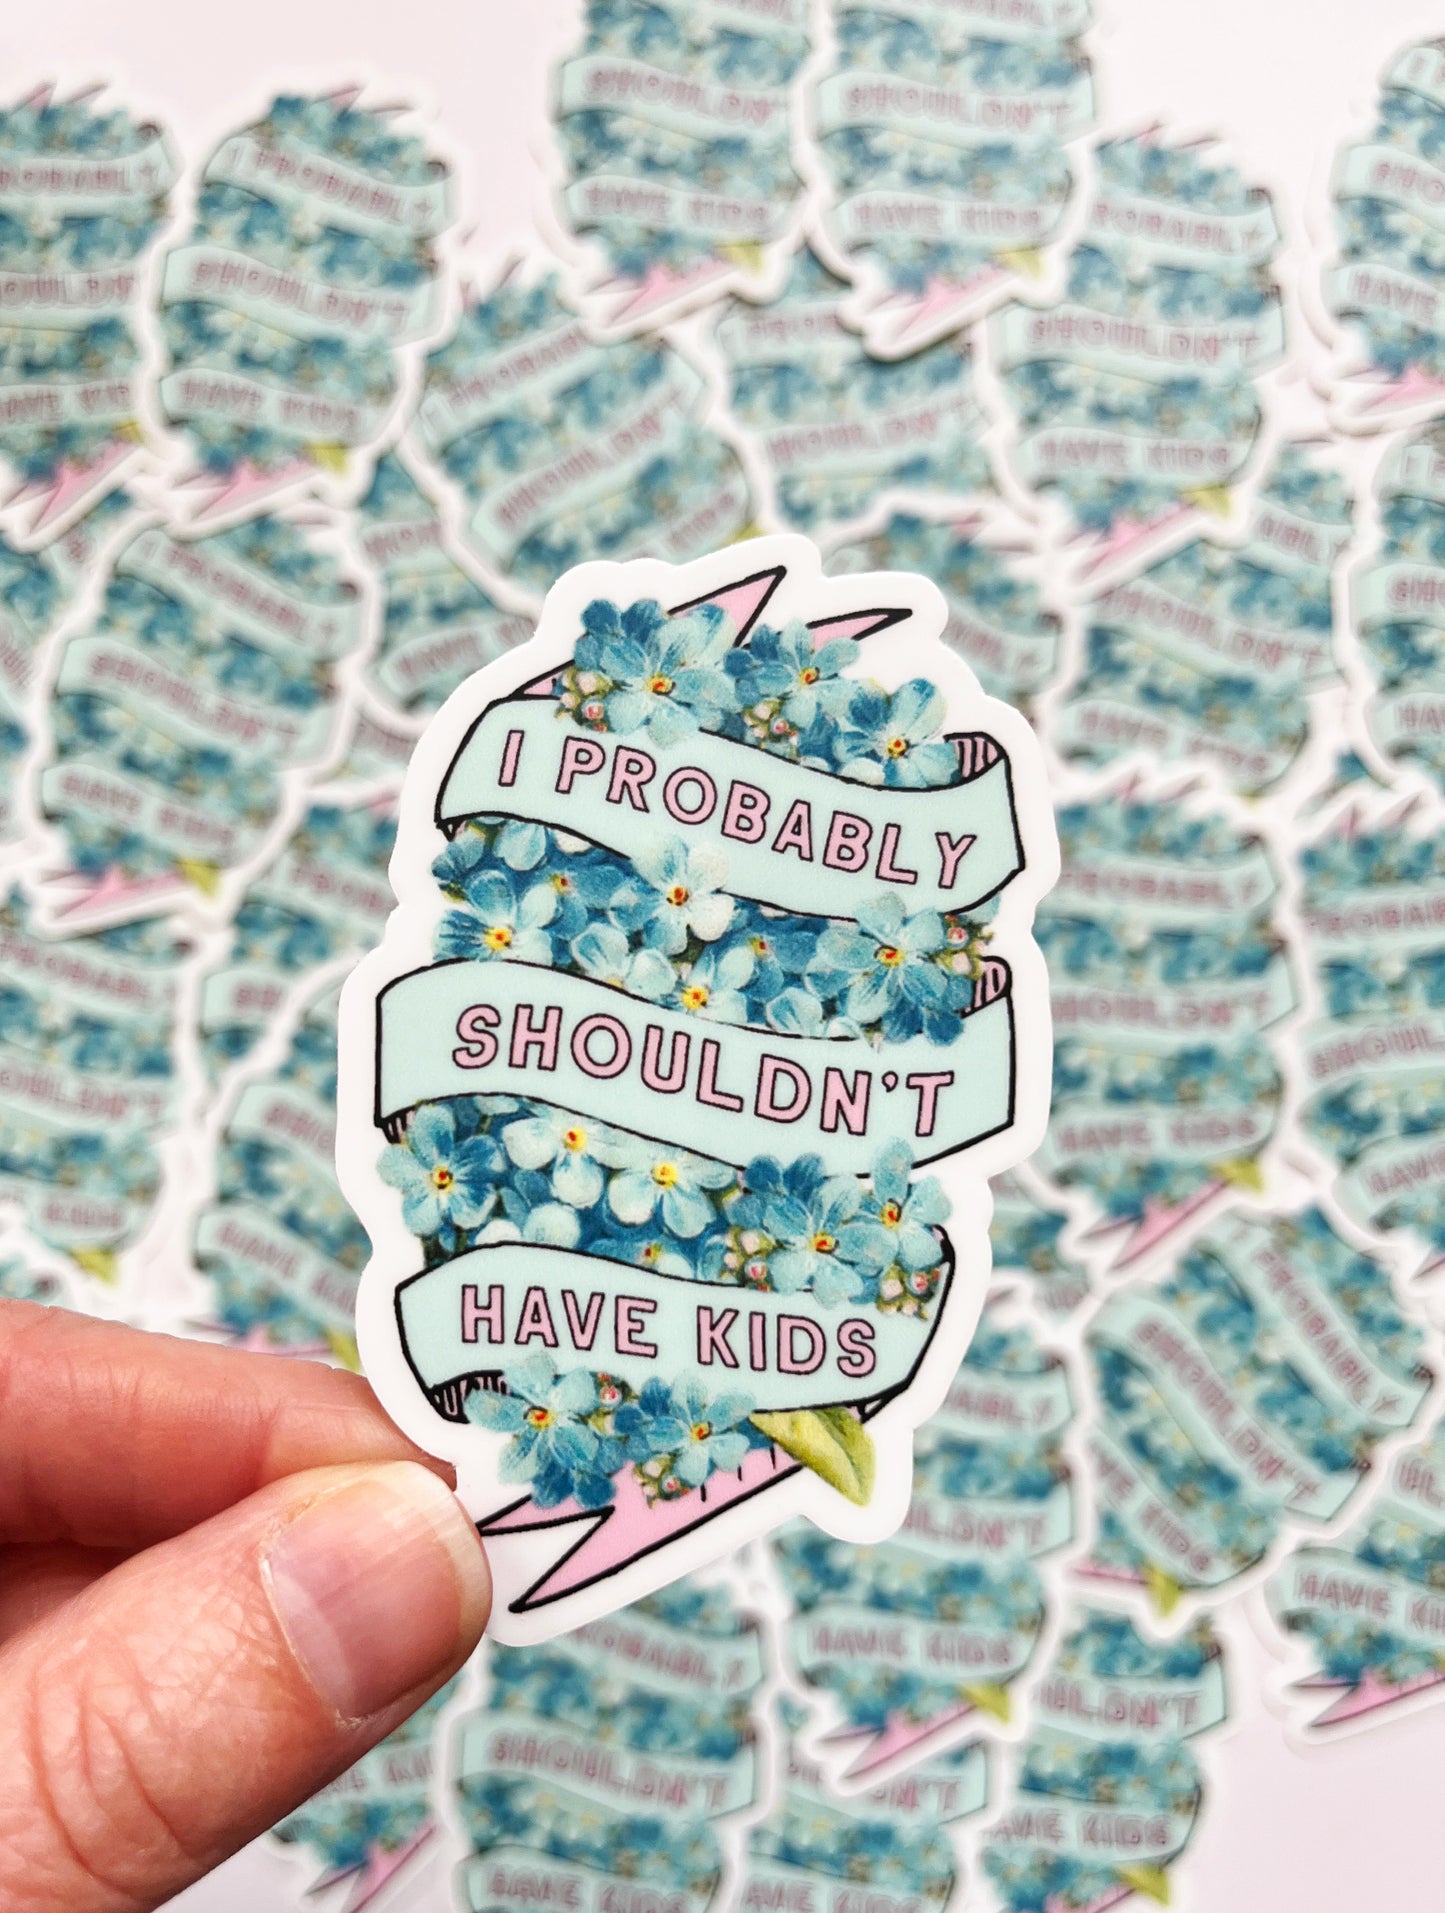 funny sarcastic sticker i probably shouldn't have kids pink blue retro flowers ribbons funny stickers about parenthood cute sticker coin laundry montana